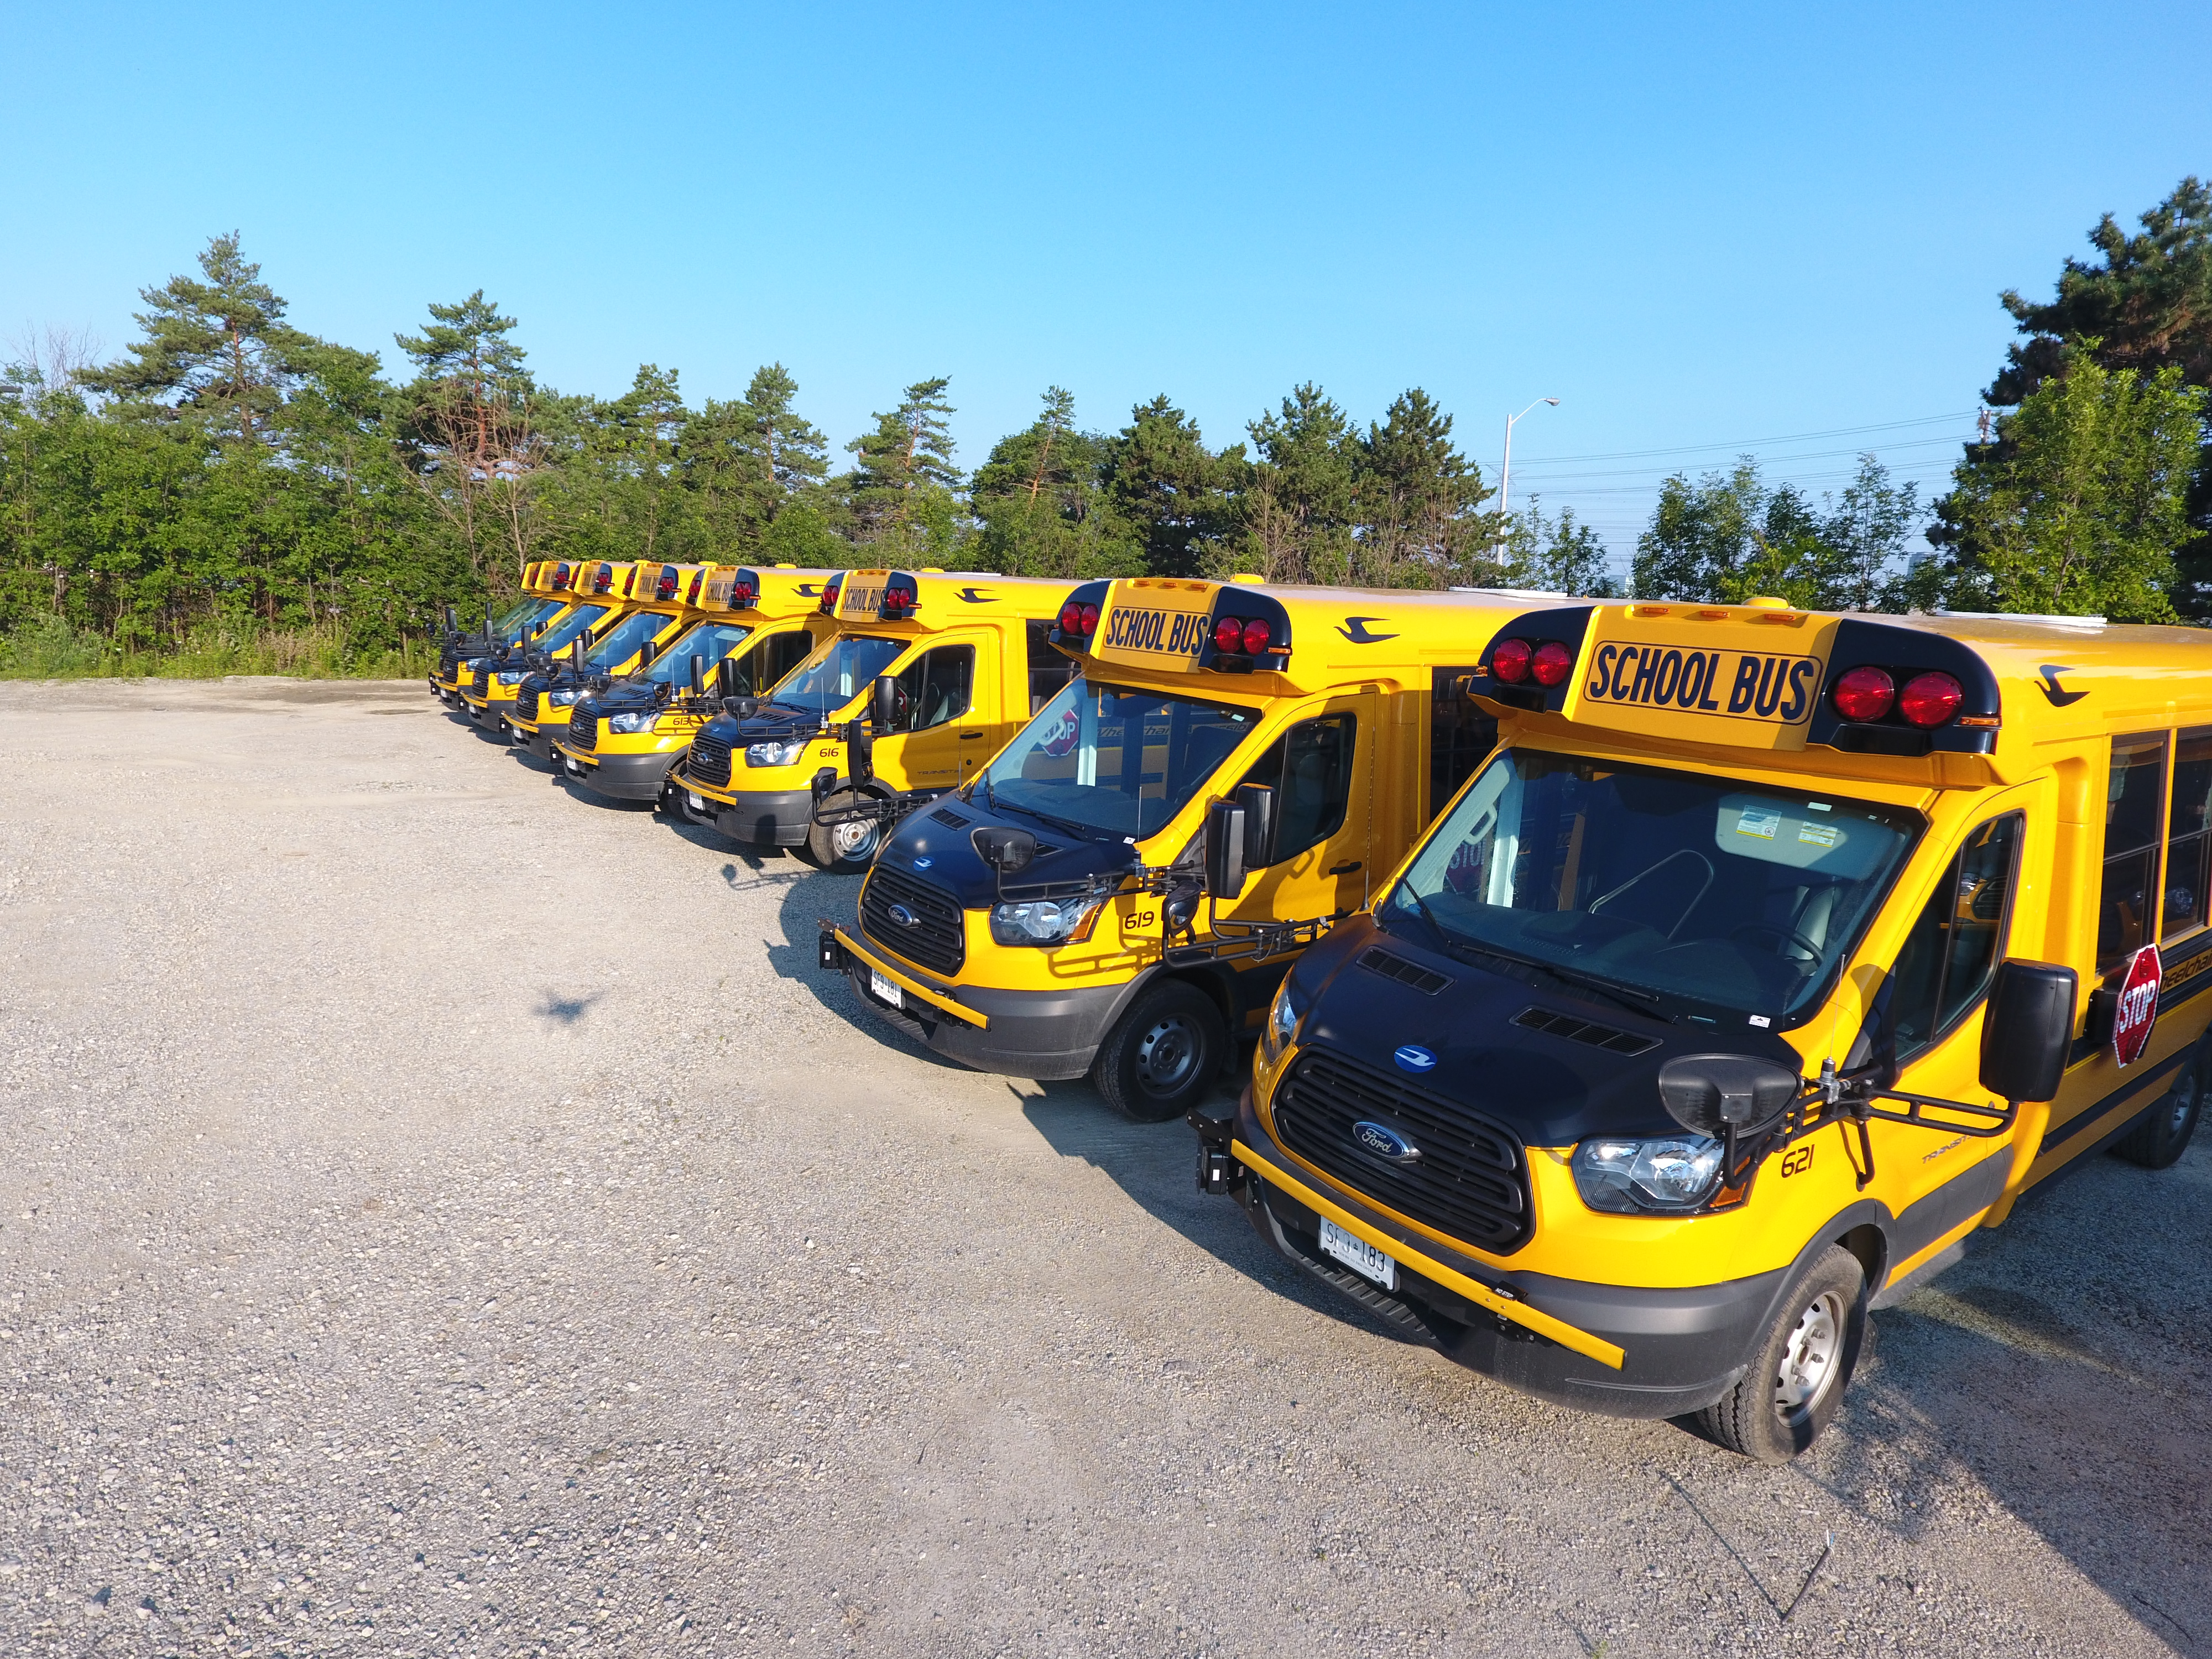 Organizers of group travel can cast their worries aside when they book one of our small school buses. Ideal for field trips, small school buses are a model of convenience, safety and cost efficiency. 